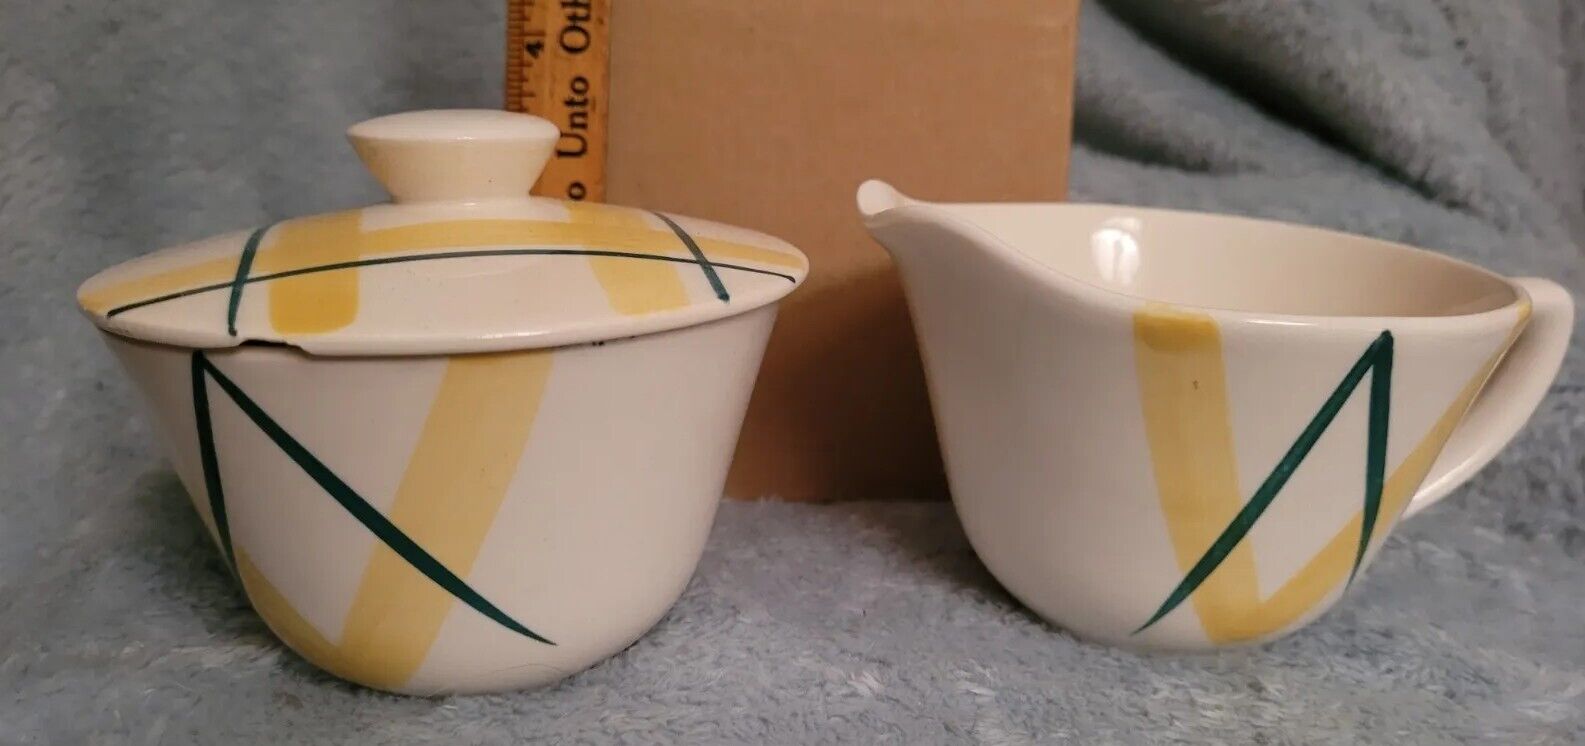 Vintage Porcelain Creamer And Sugar Set white blue and yellow 1970s 1980s